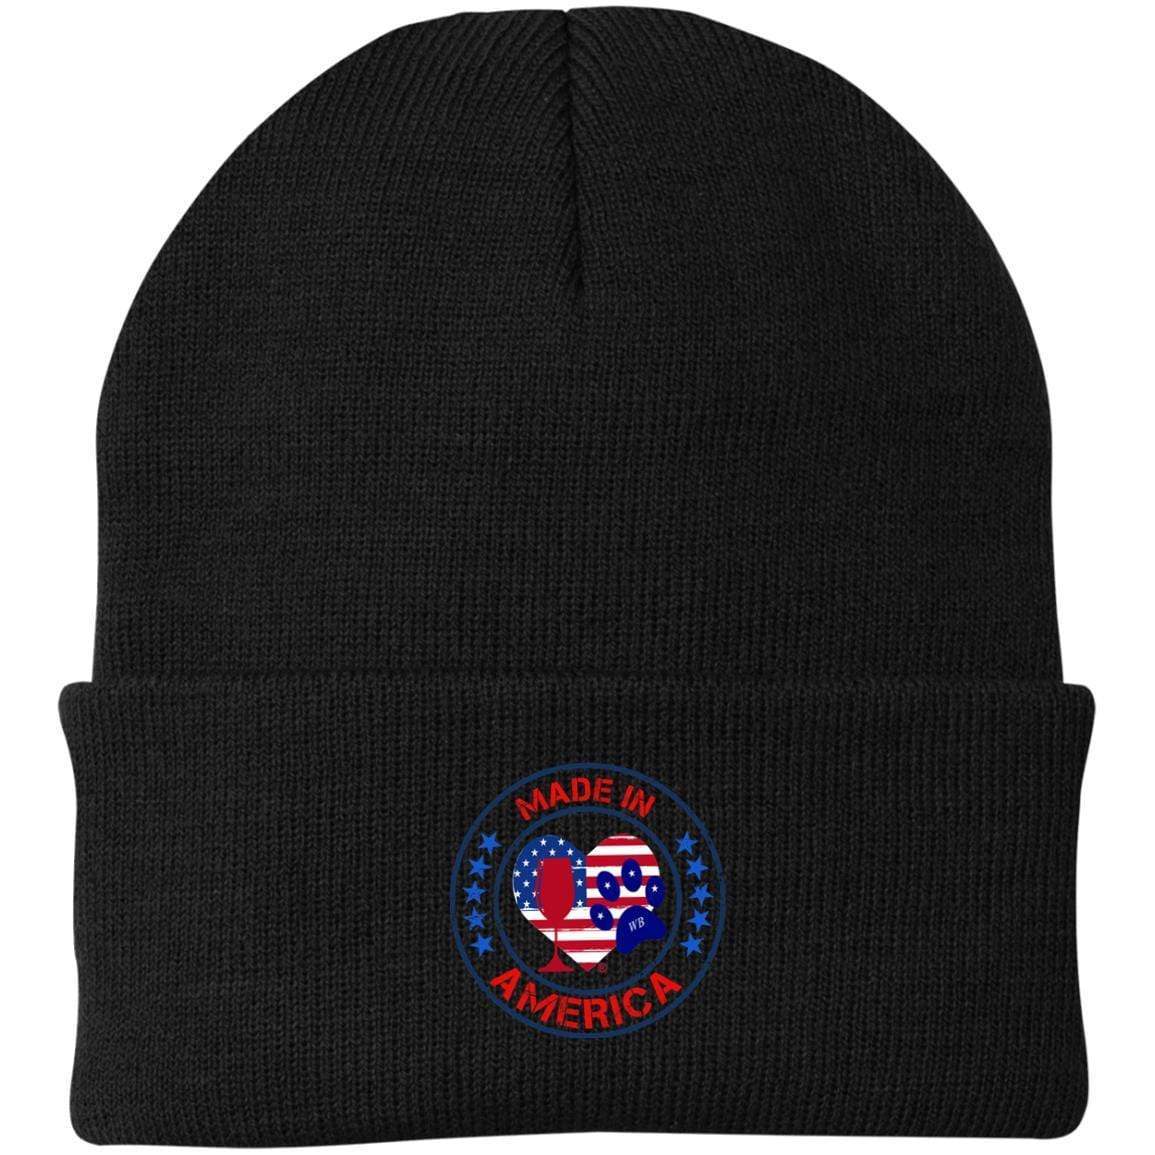 Hats Black / One Size Winey Bitches Co "Made In America" Embroidered Knit Cap WineyBitchesCo